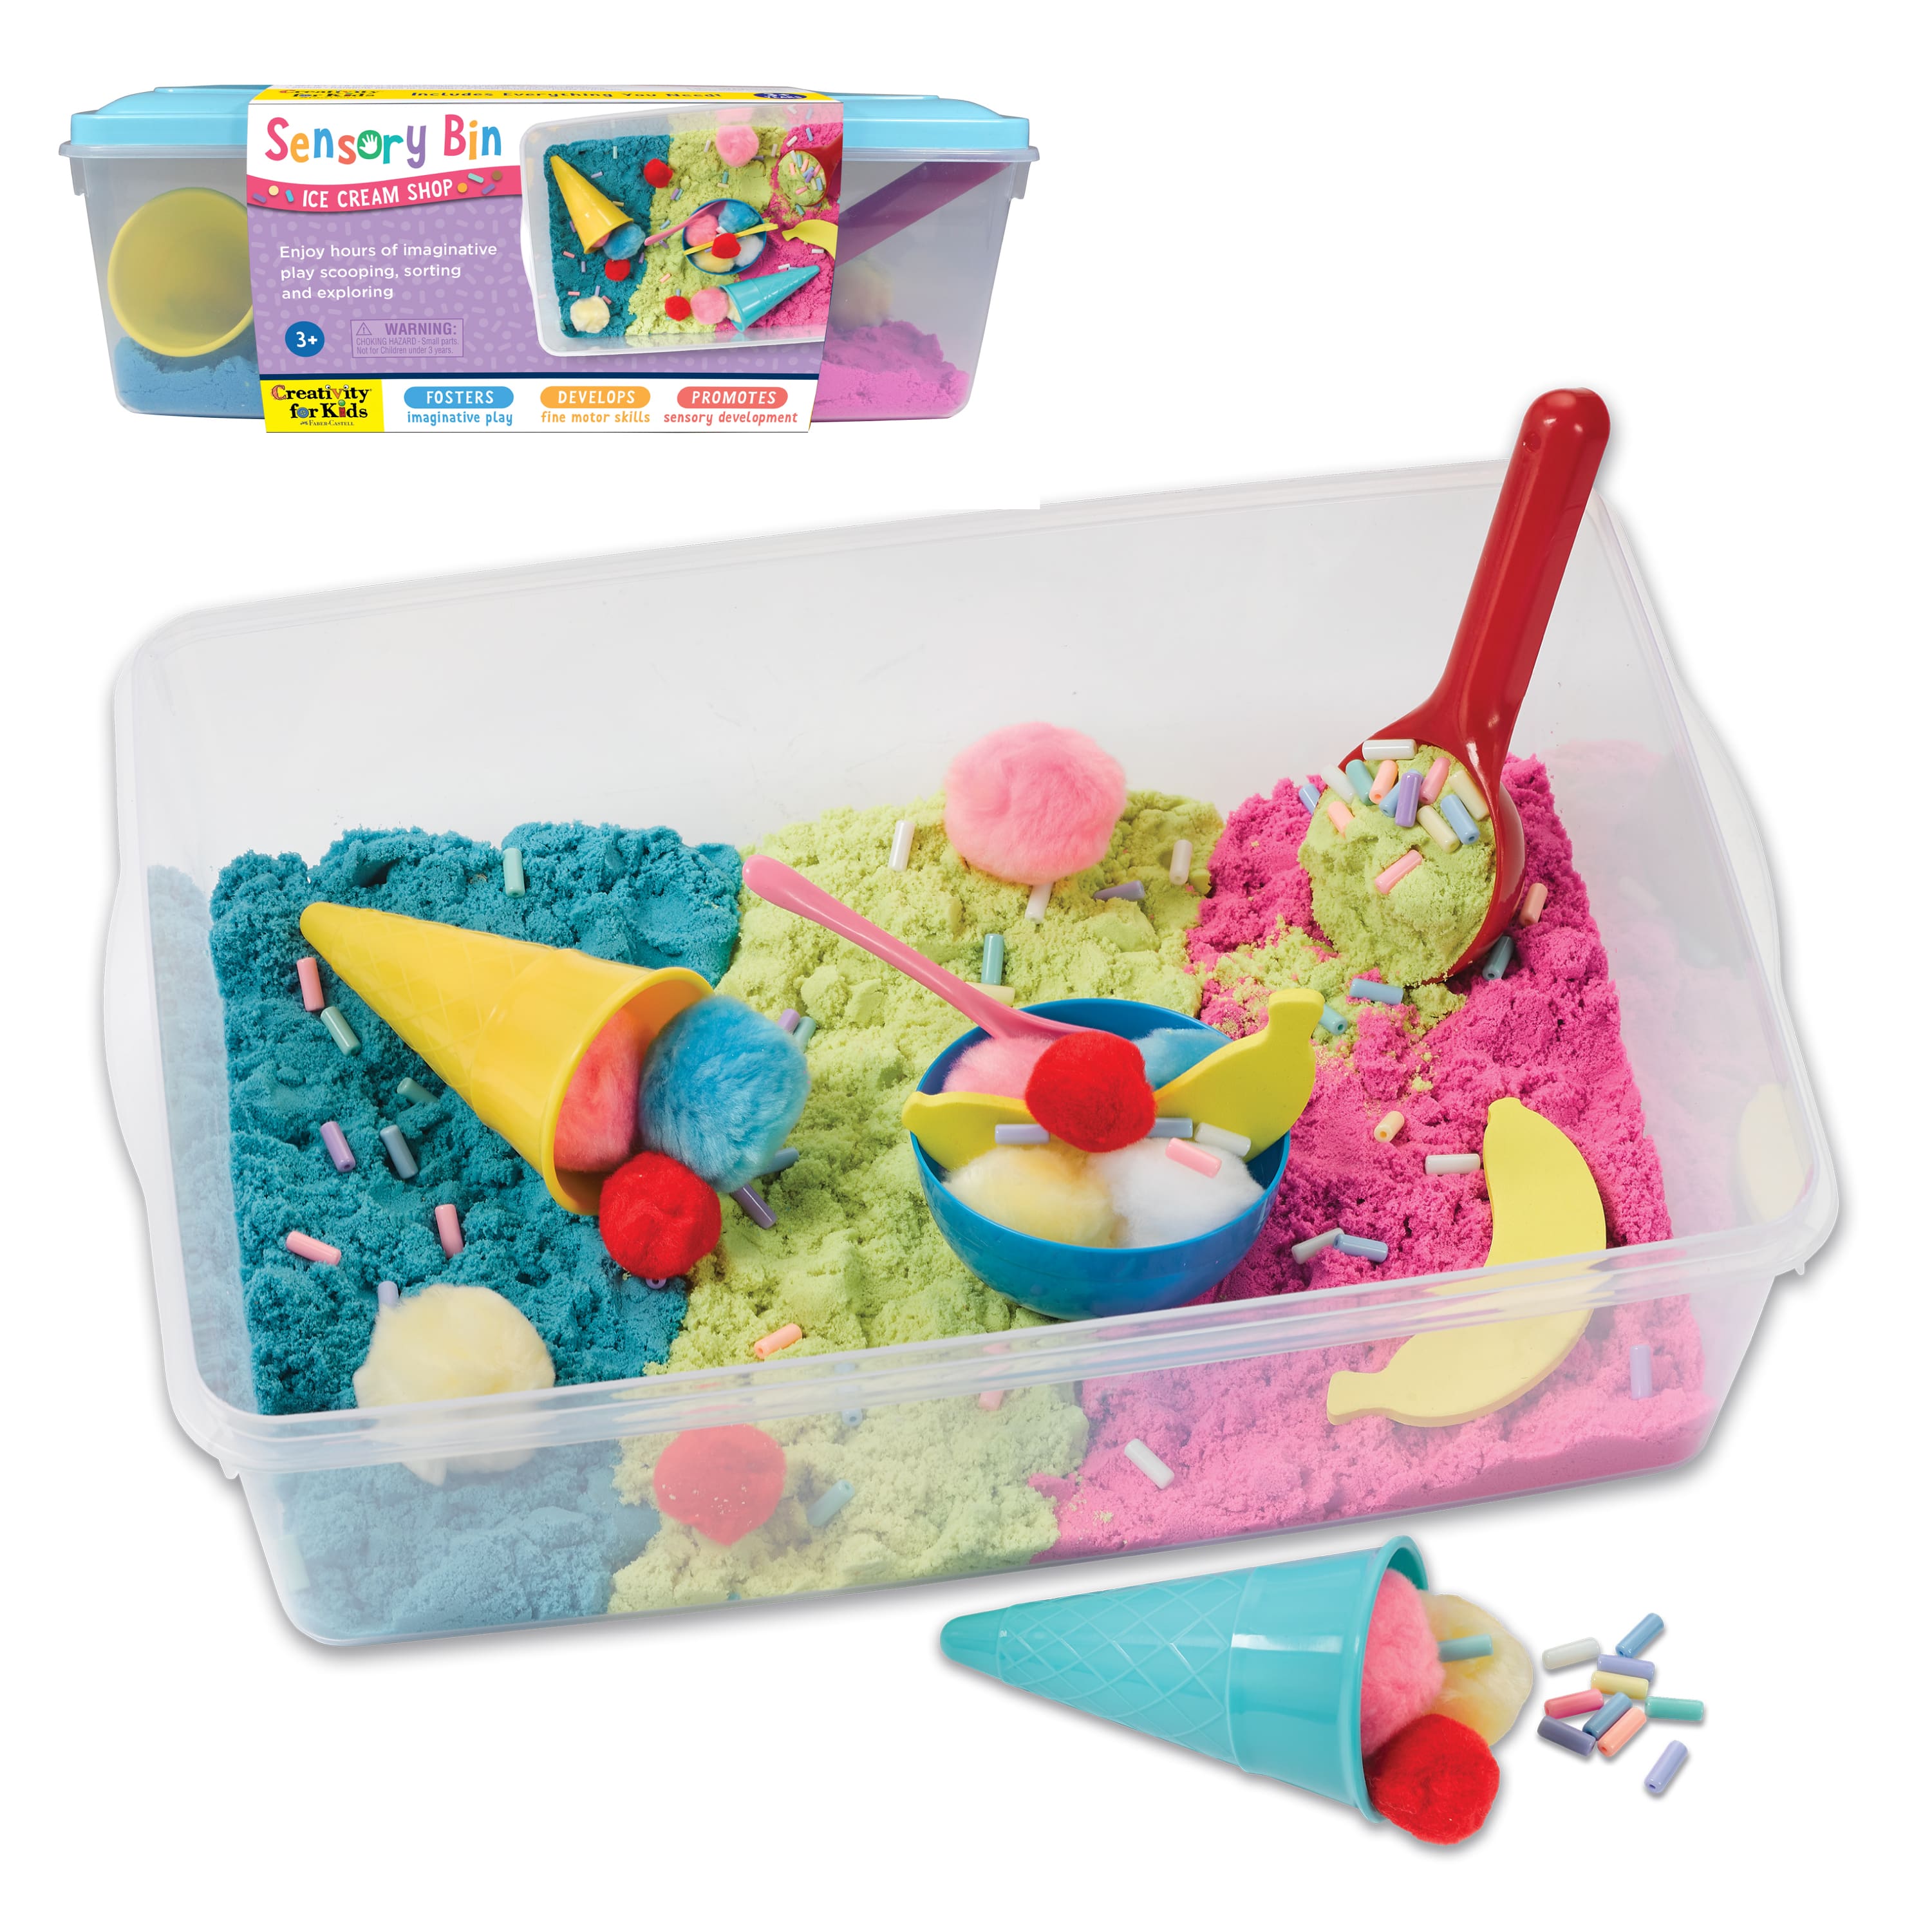 Playdough Kit, Ice Cream Play Dough Kit for Girls, Sensory Play, Pretend  Play Food, Party Favor, Playdoh Tools, Craft Kit, Busy Box for Kids